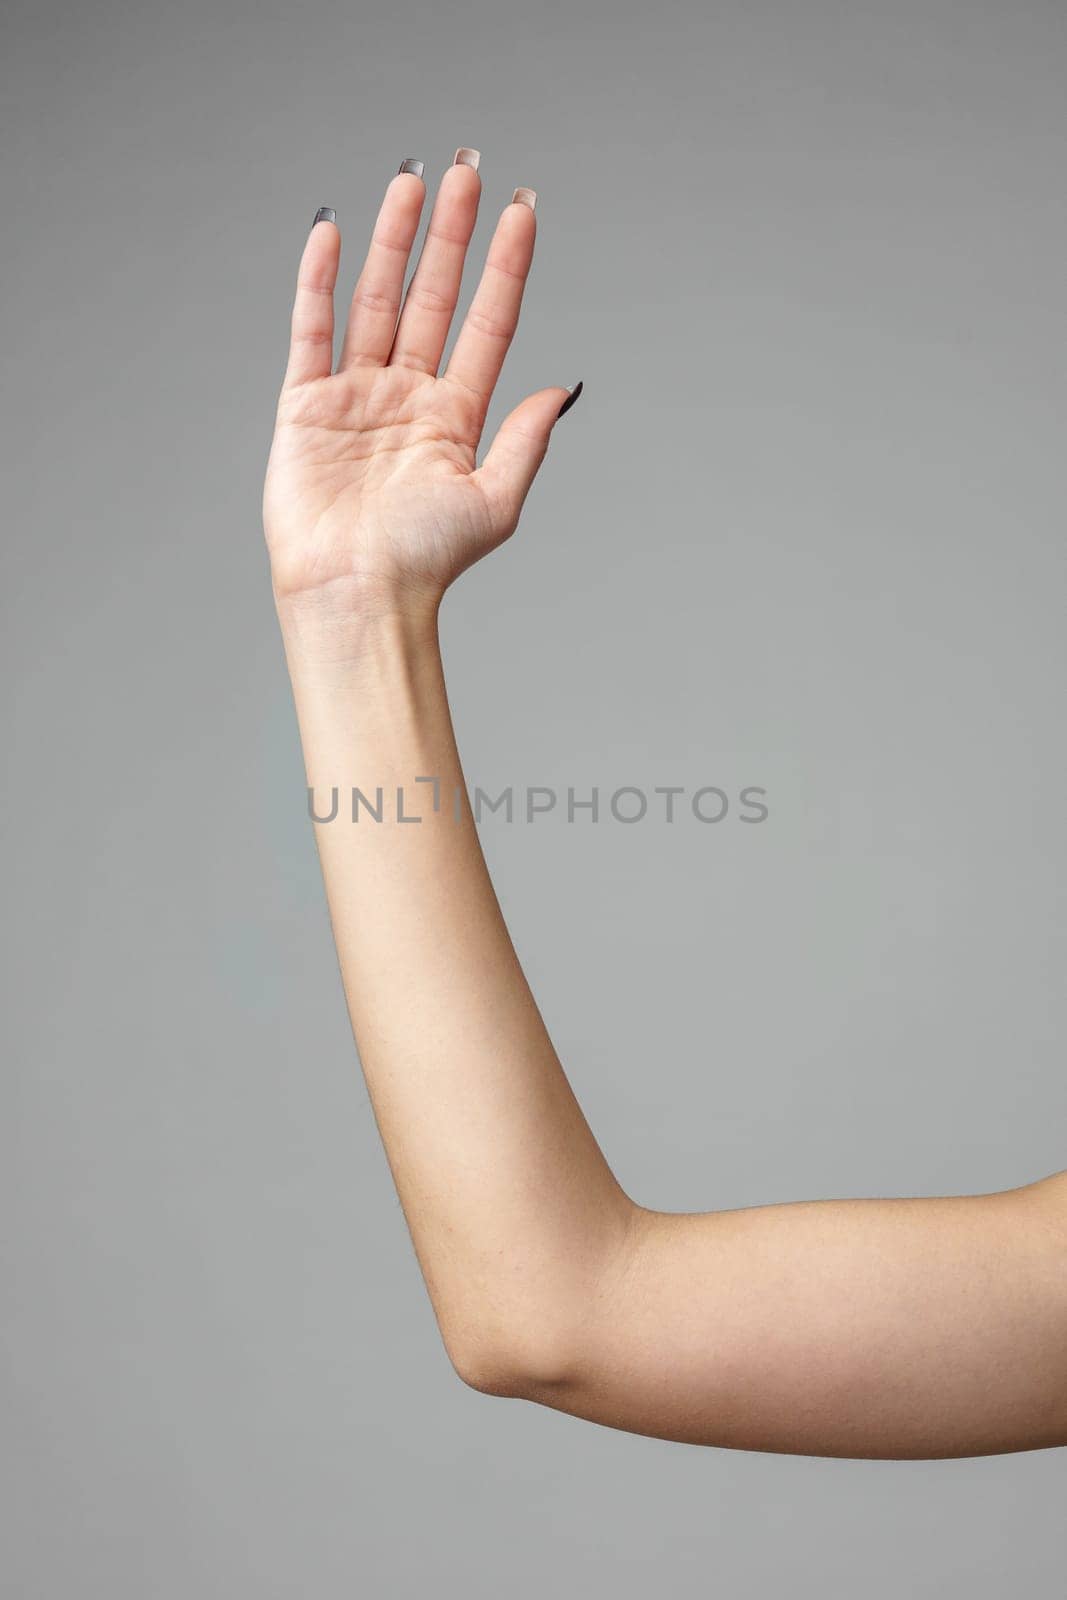 Raised Left Hand Against a Plain Gray Background Demonstrating a Gesture by Fabrikasimf